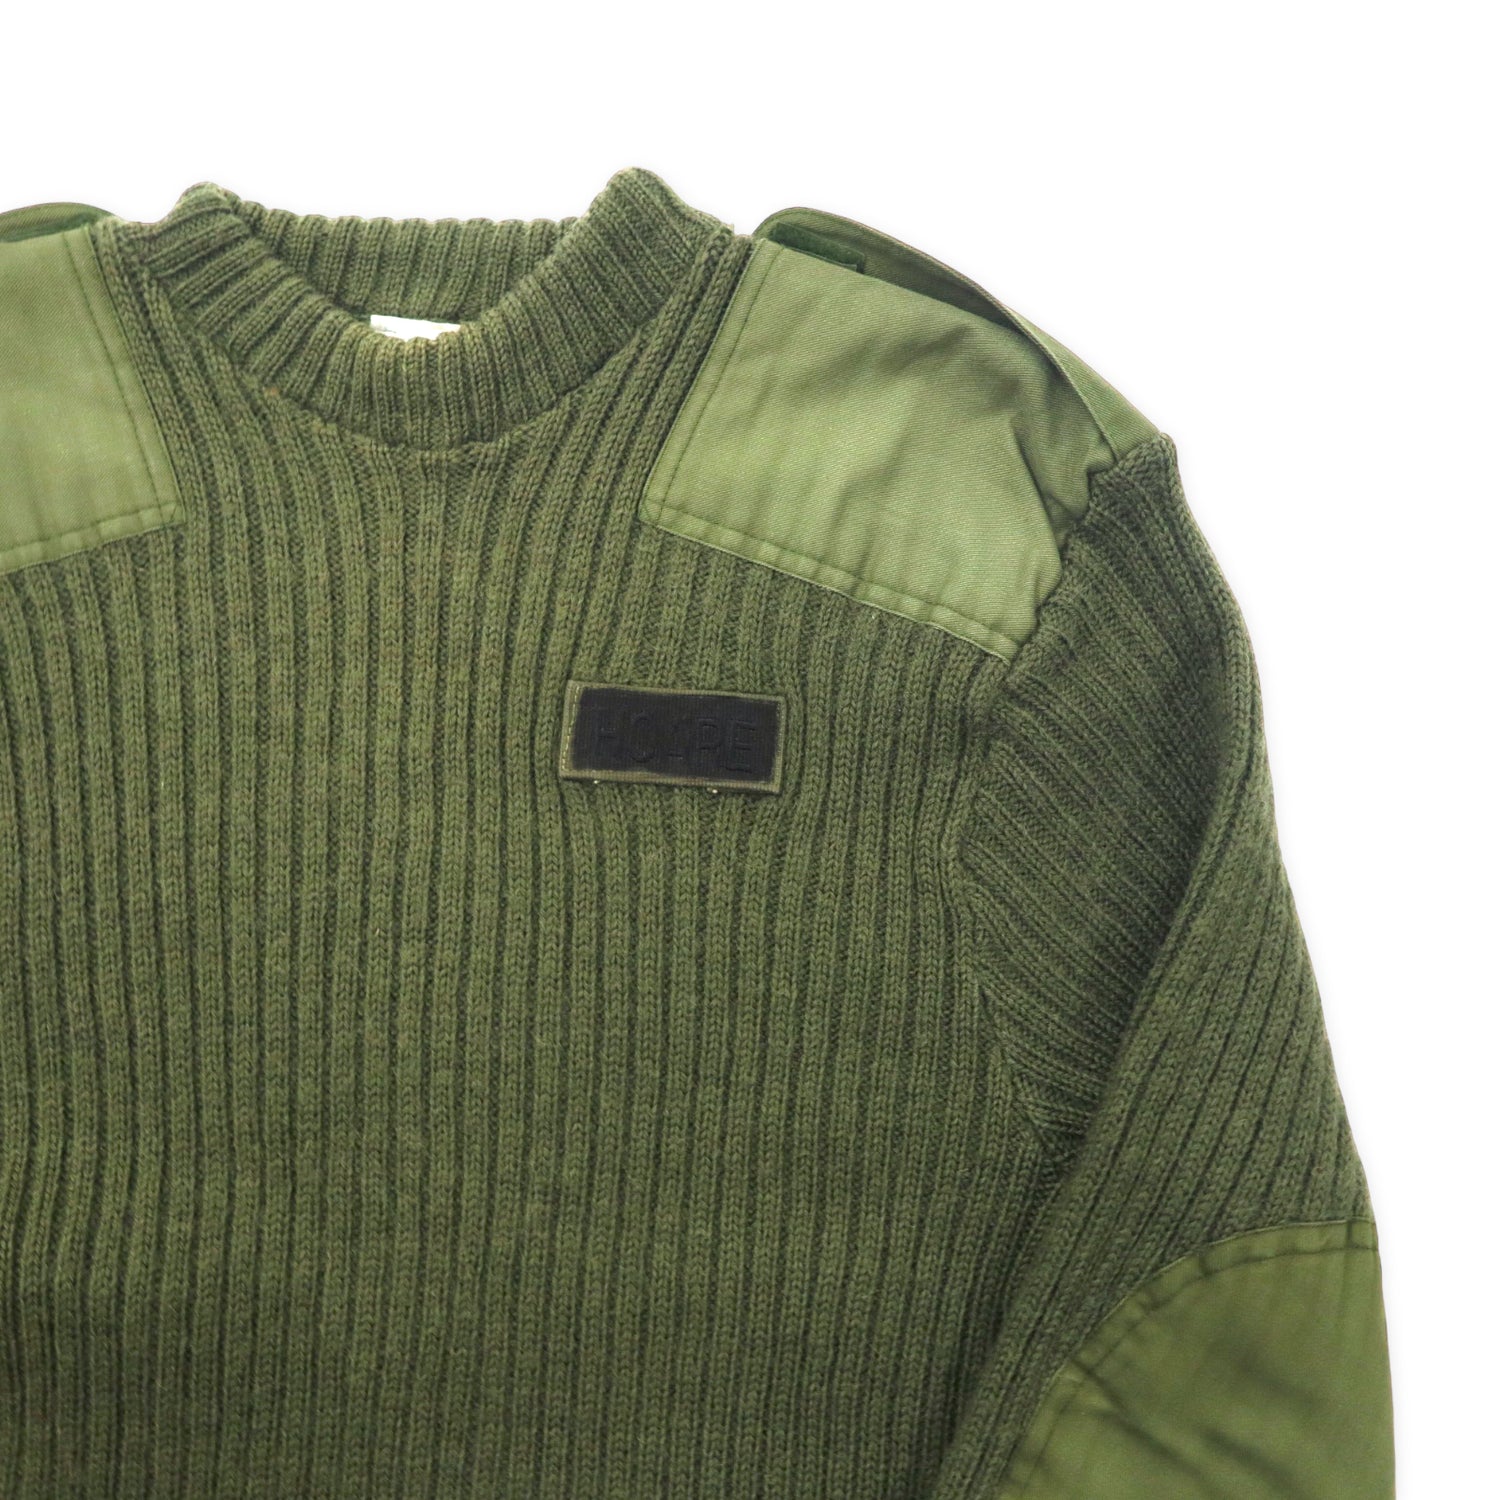 British Army 90's Command Knit Sweater L KHAKI Wool Military Elbow 